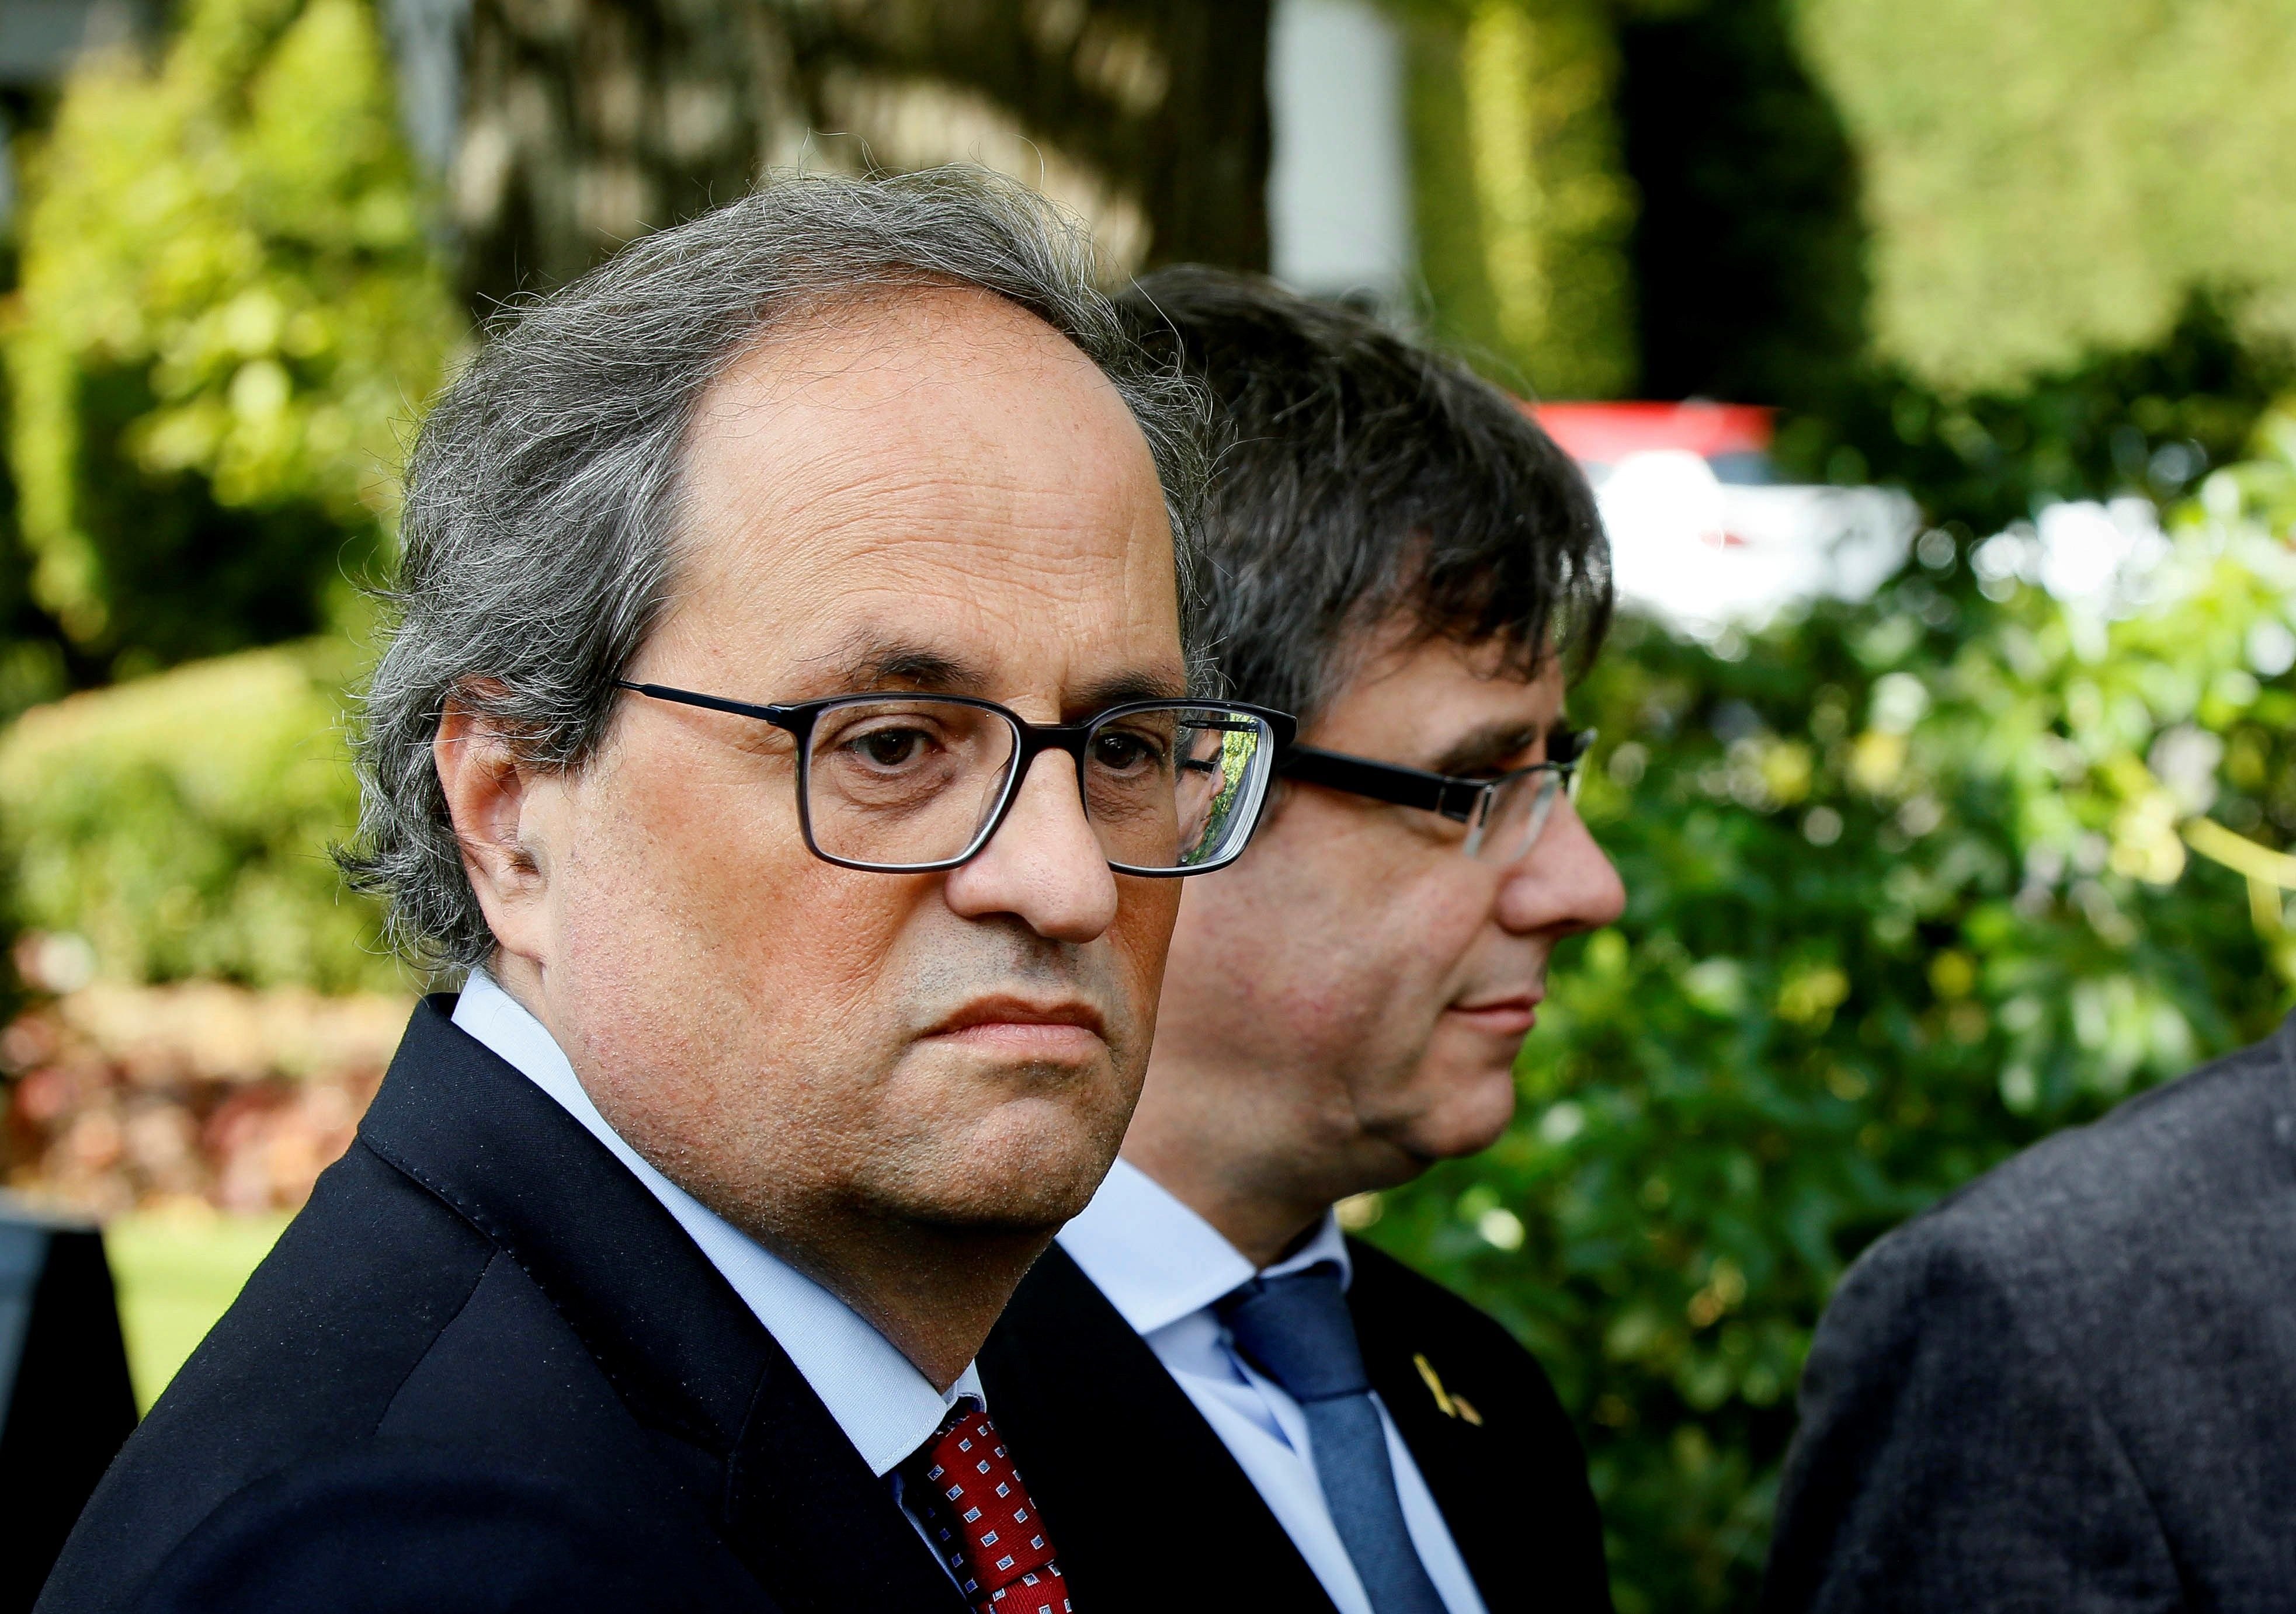 Main Spanish parties ask European Parliament to ban Puigdemont from speaking